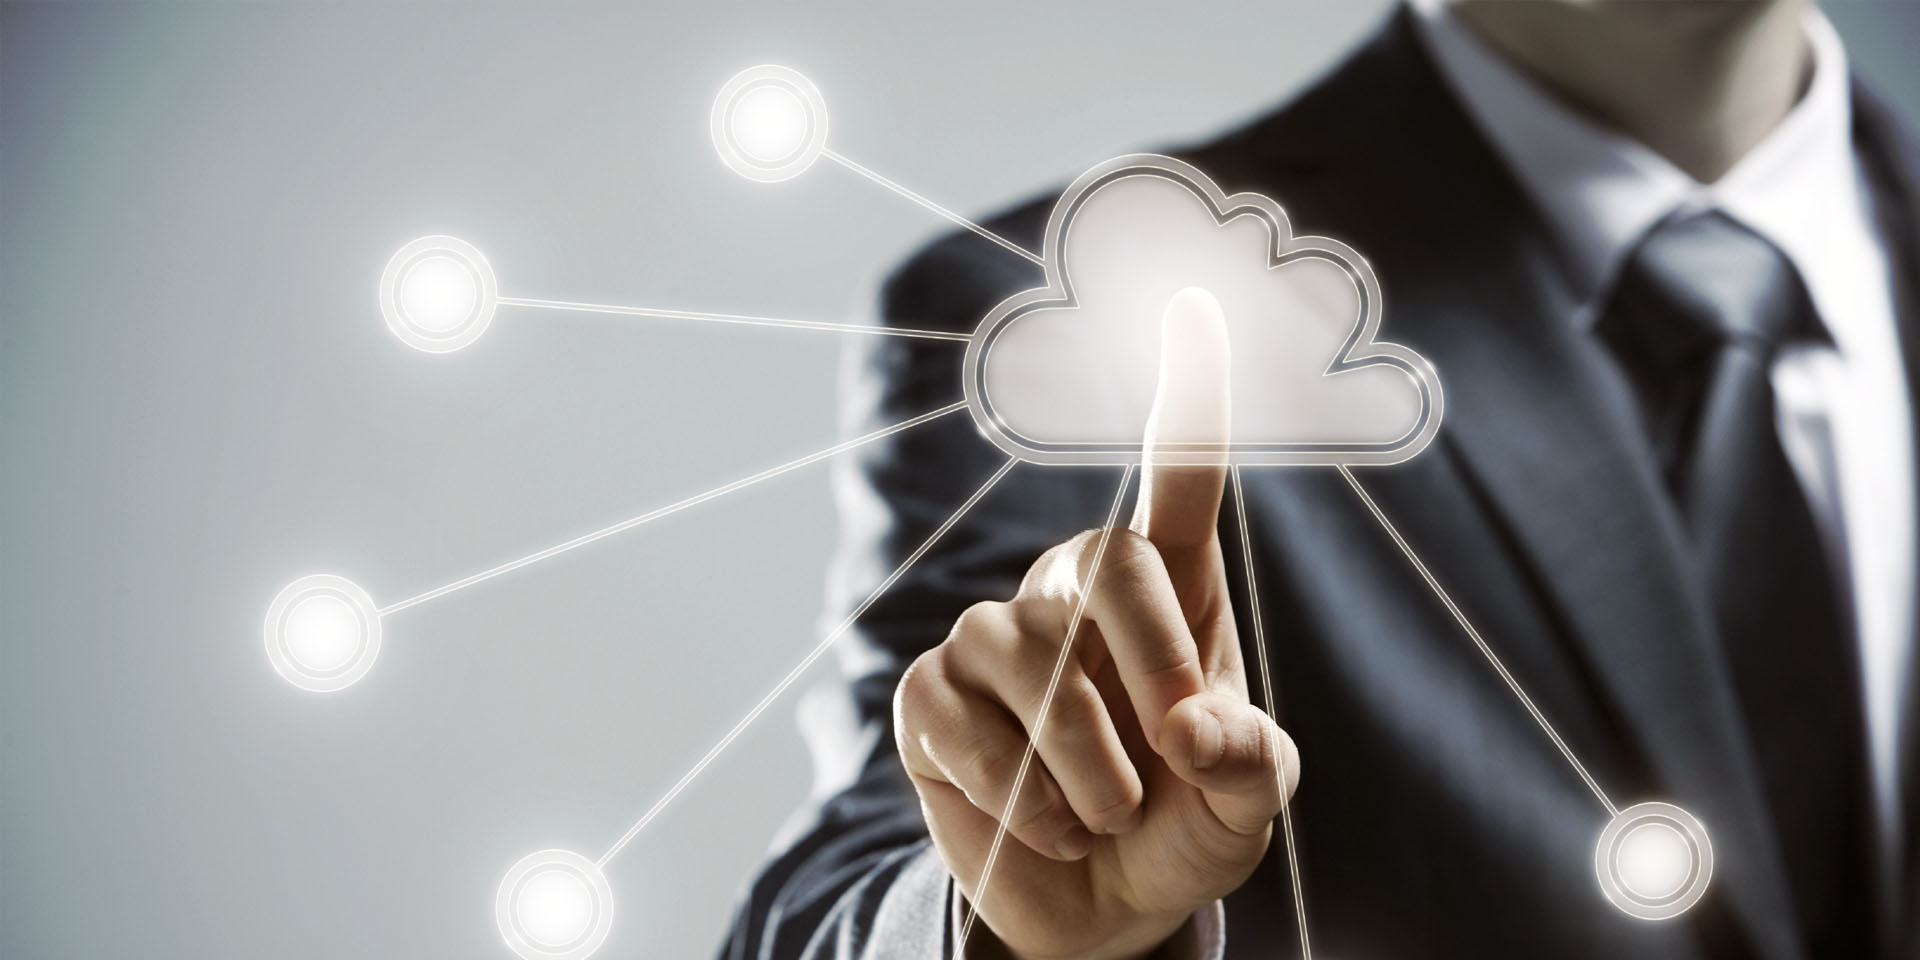 Cloud storage involves the use of external servers for storing a company's information, allowing for much more secure and accessible data hosting